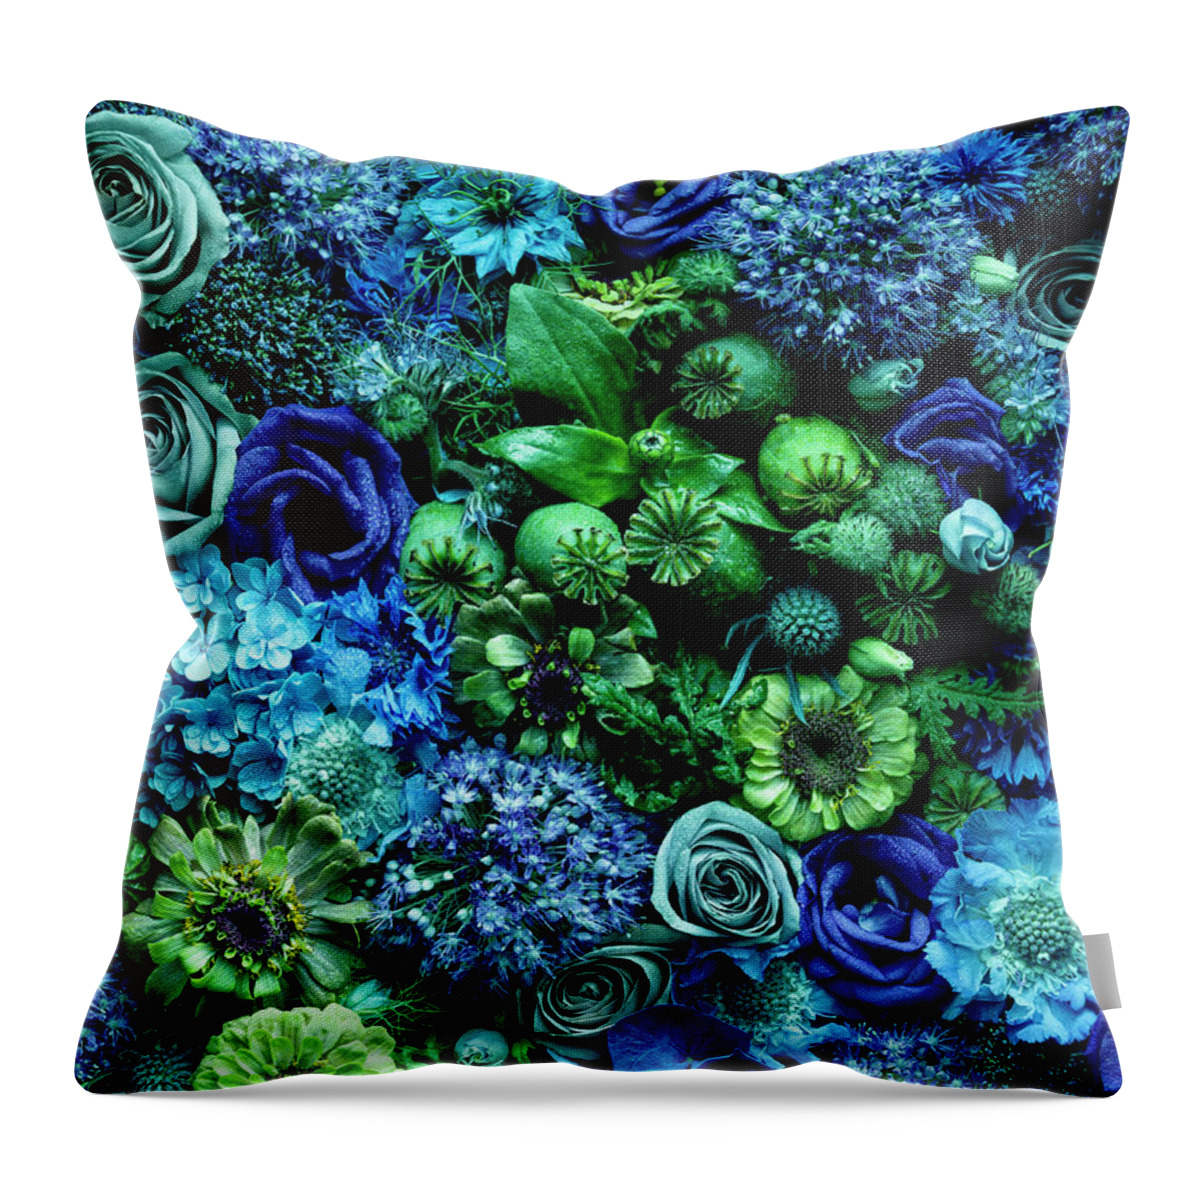 Simplicity Throw Pillow featuring the photograph Flower Arrangment, Full Frame by Jonathan Knowles